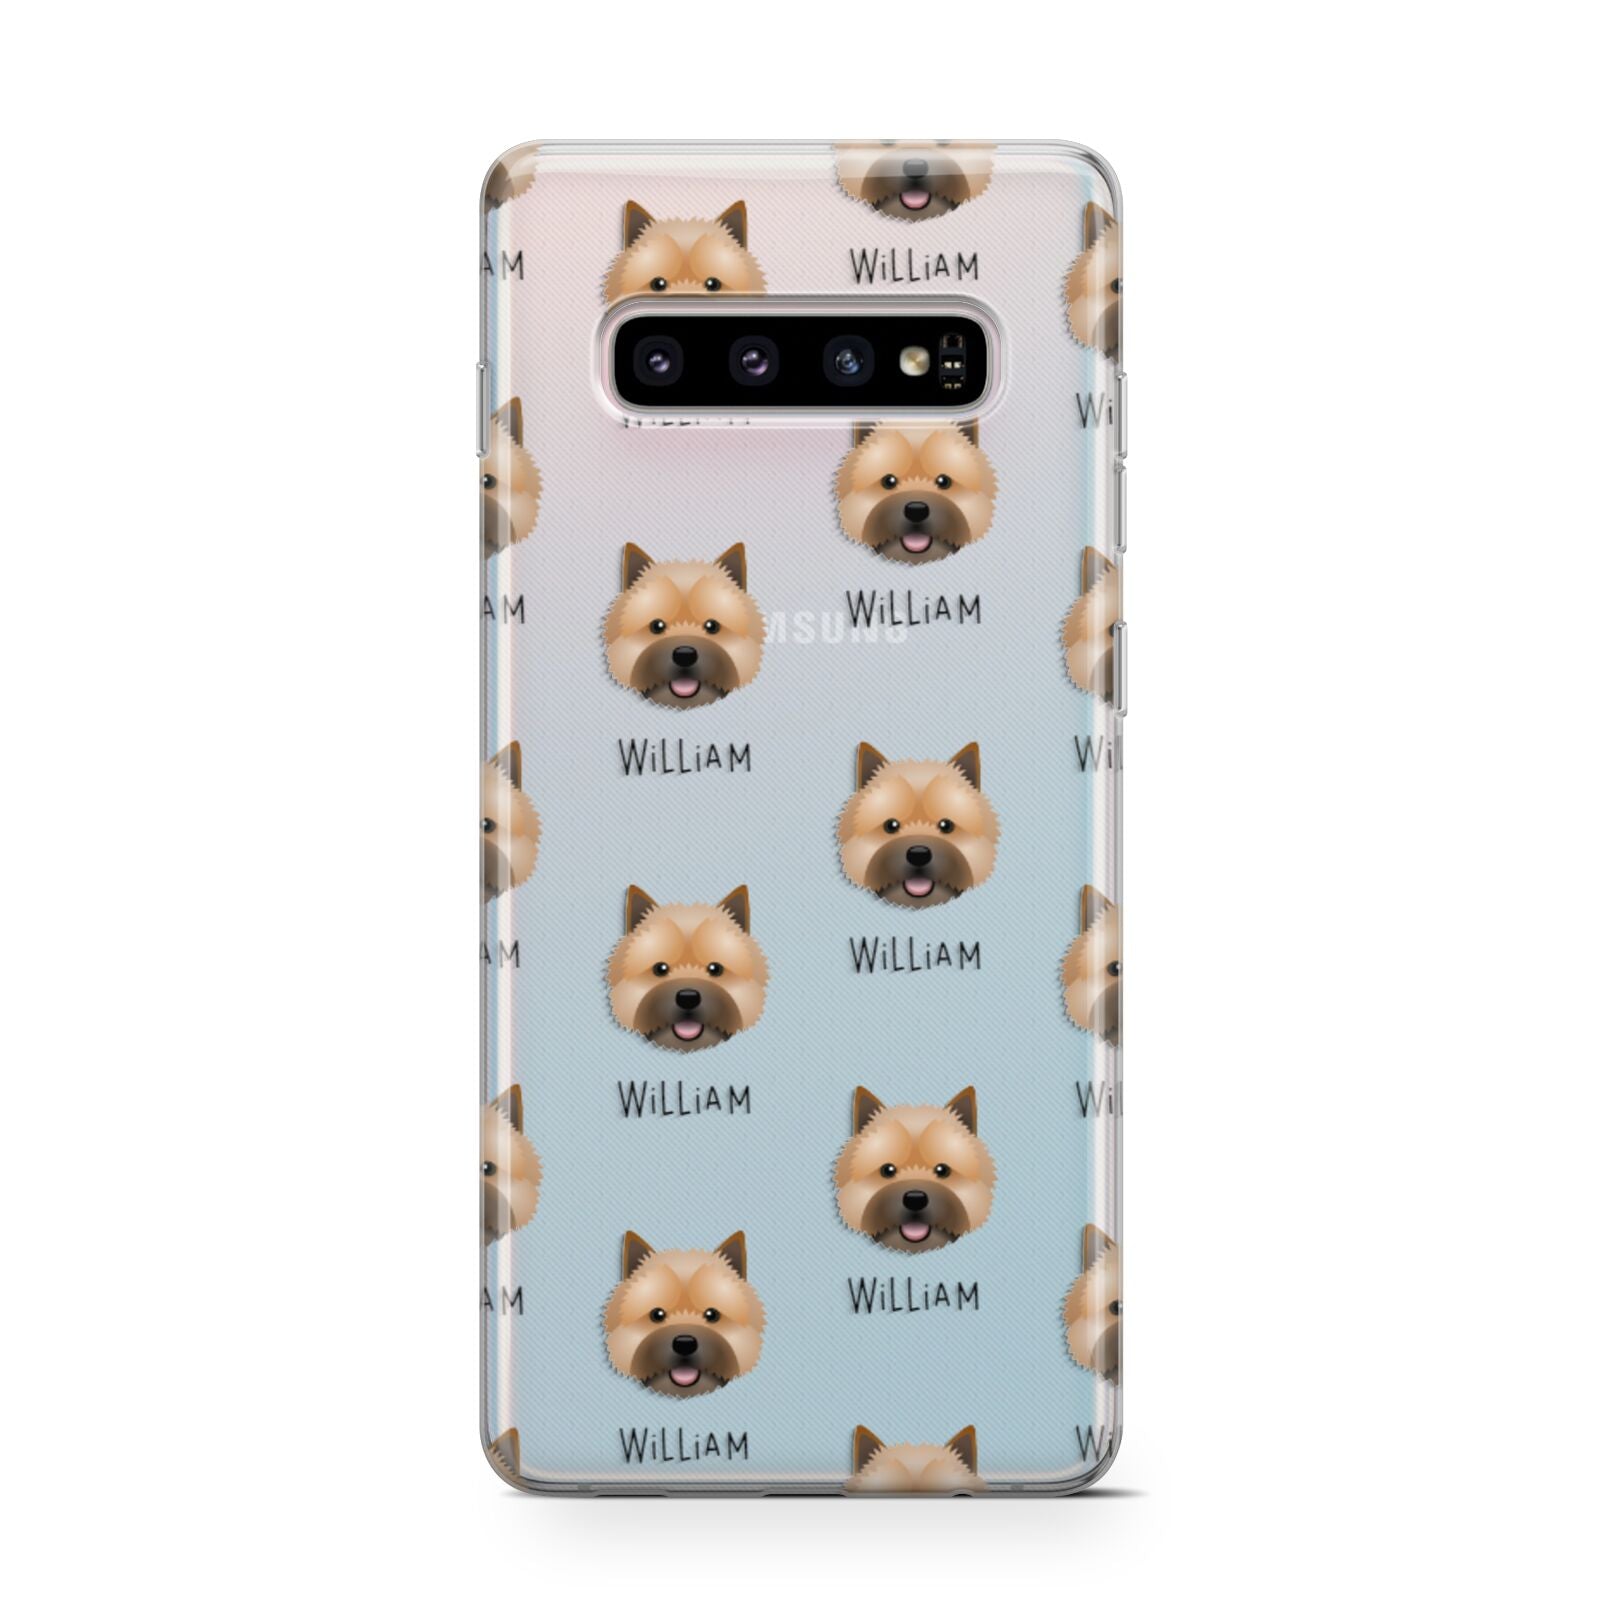 Norwich Terrier Icon with Name Samsung Galaxy S10 Case